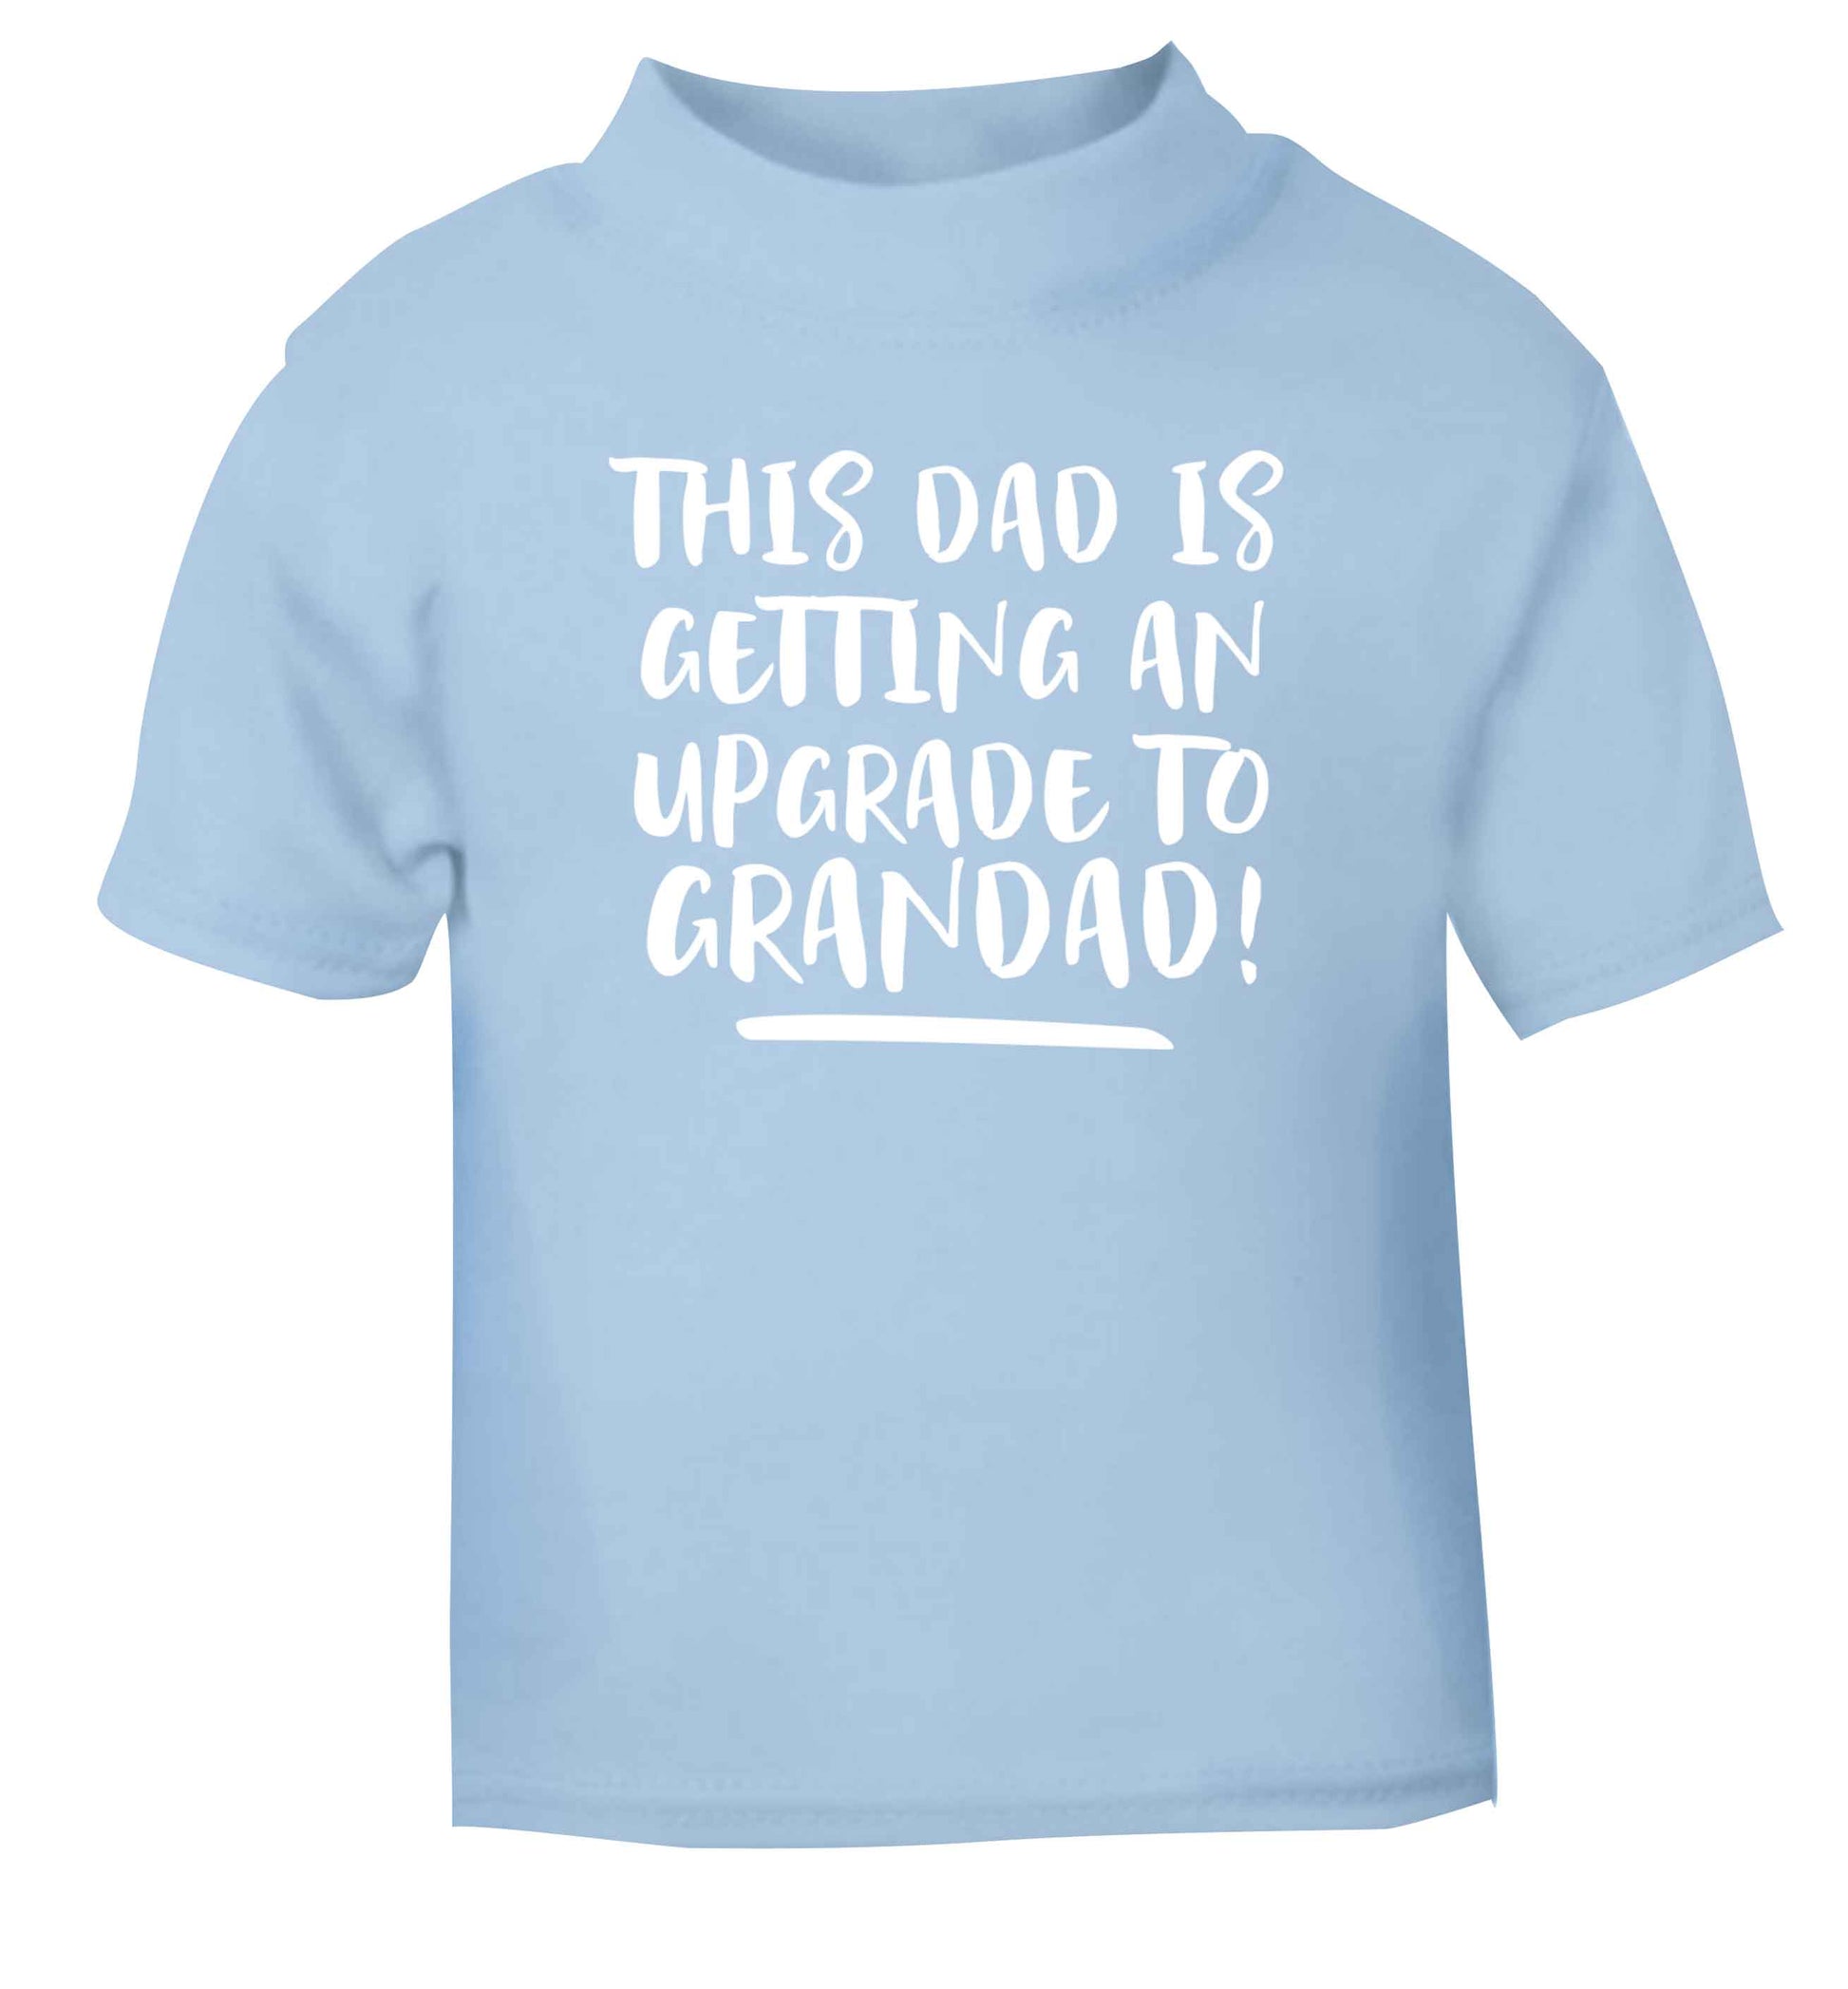 This dad is getting an upgrade to grandad! light blue Baby Toddler Tshirt 2 Years